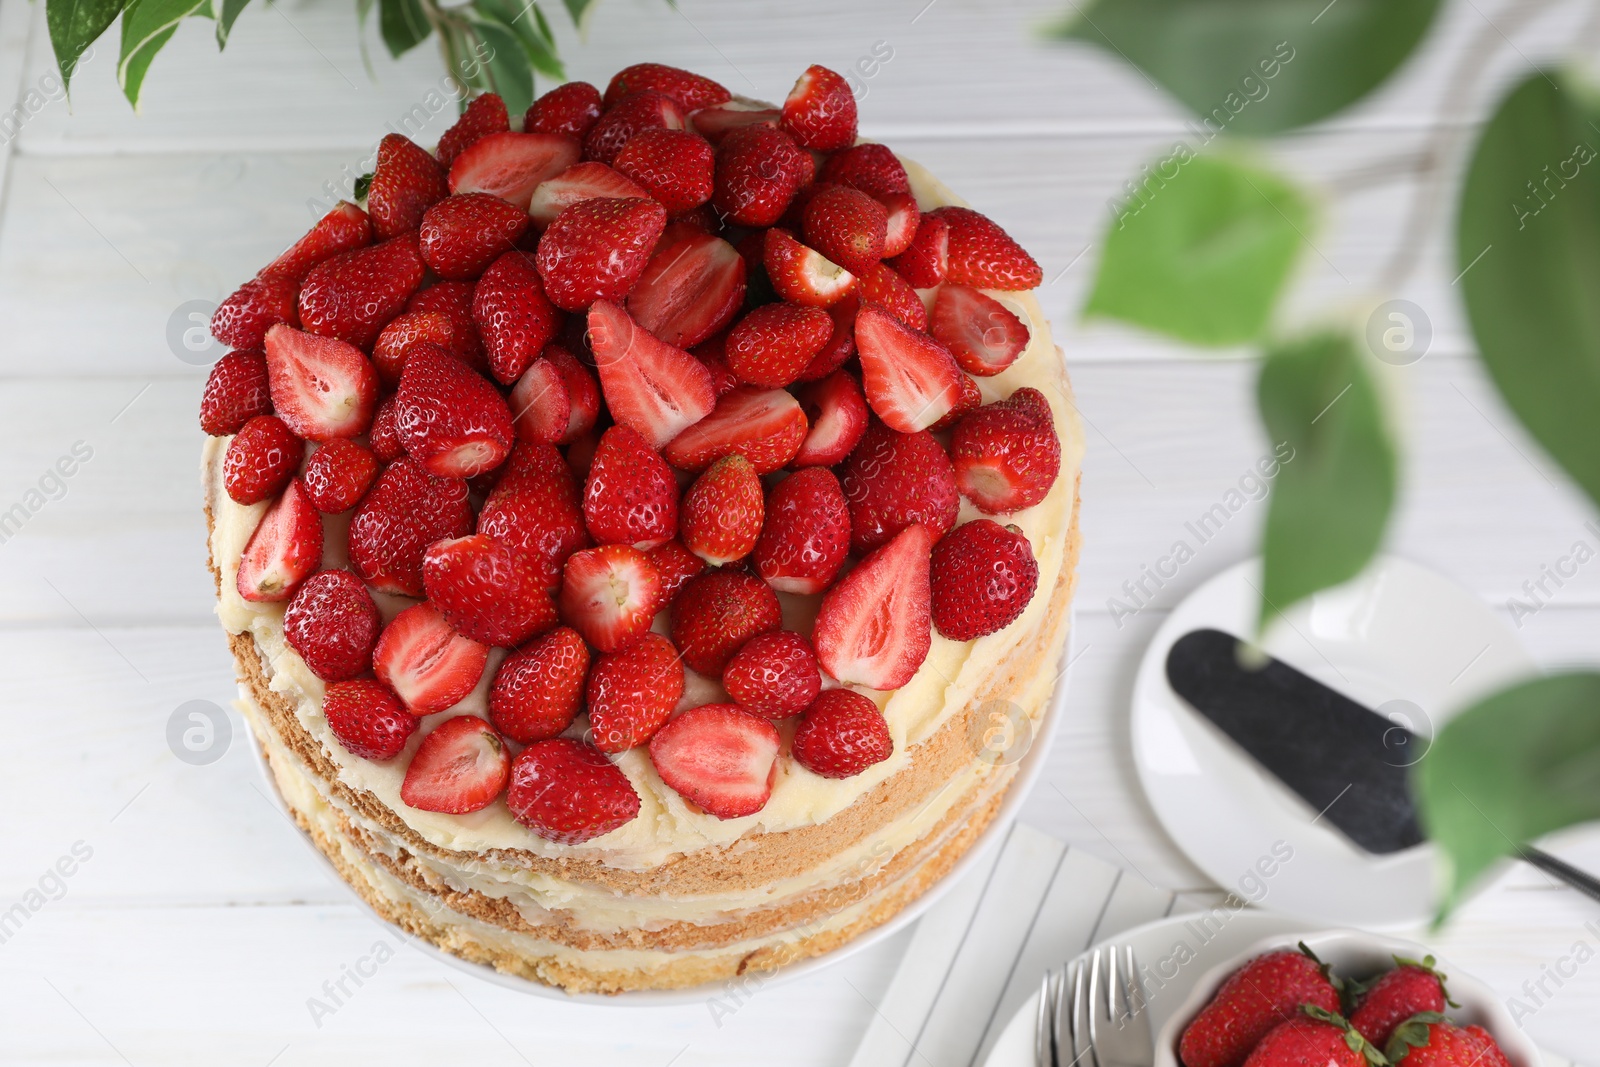 Photo of Tasty cake with fresh strawberries served on white table, above view